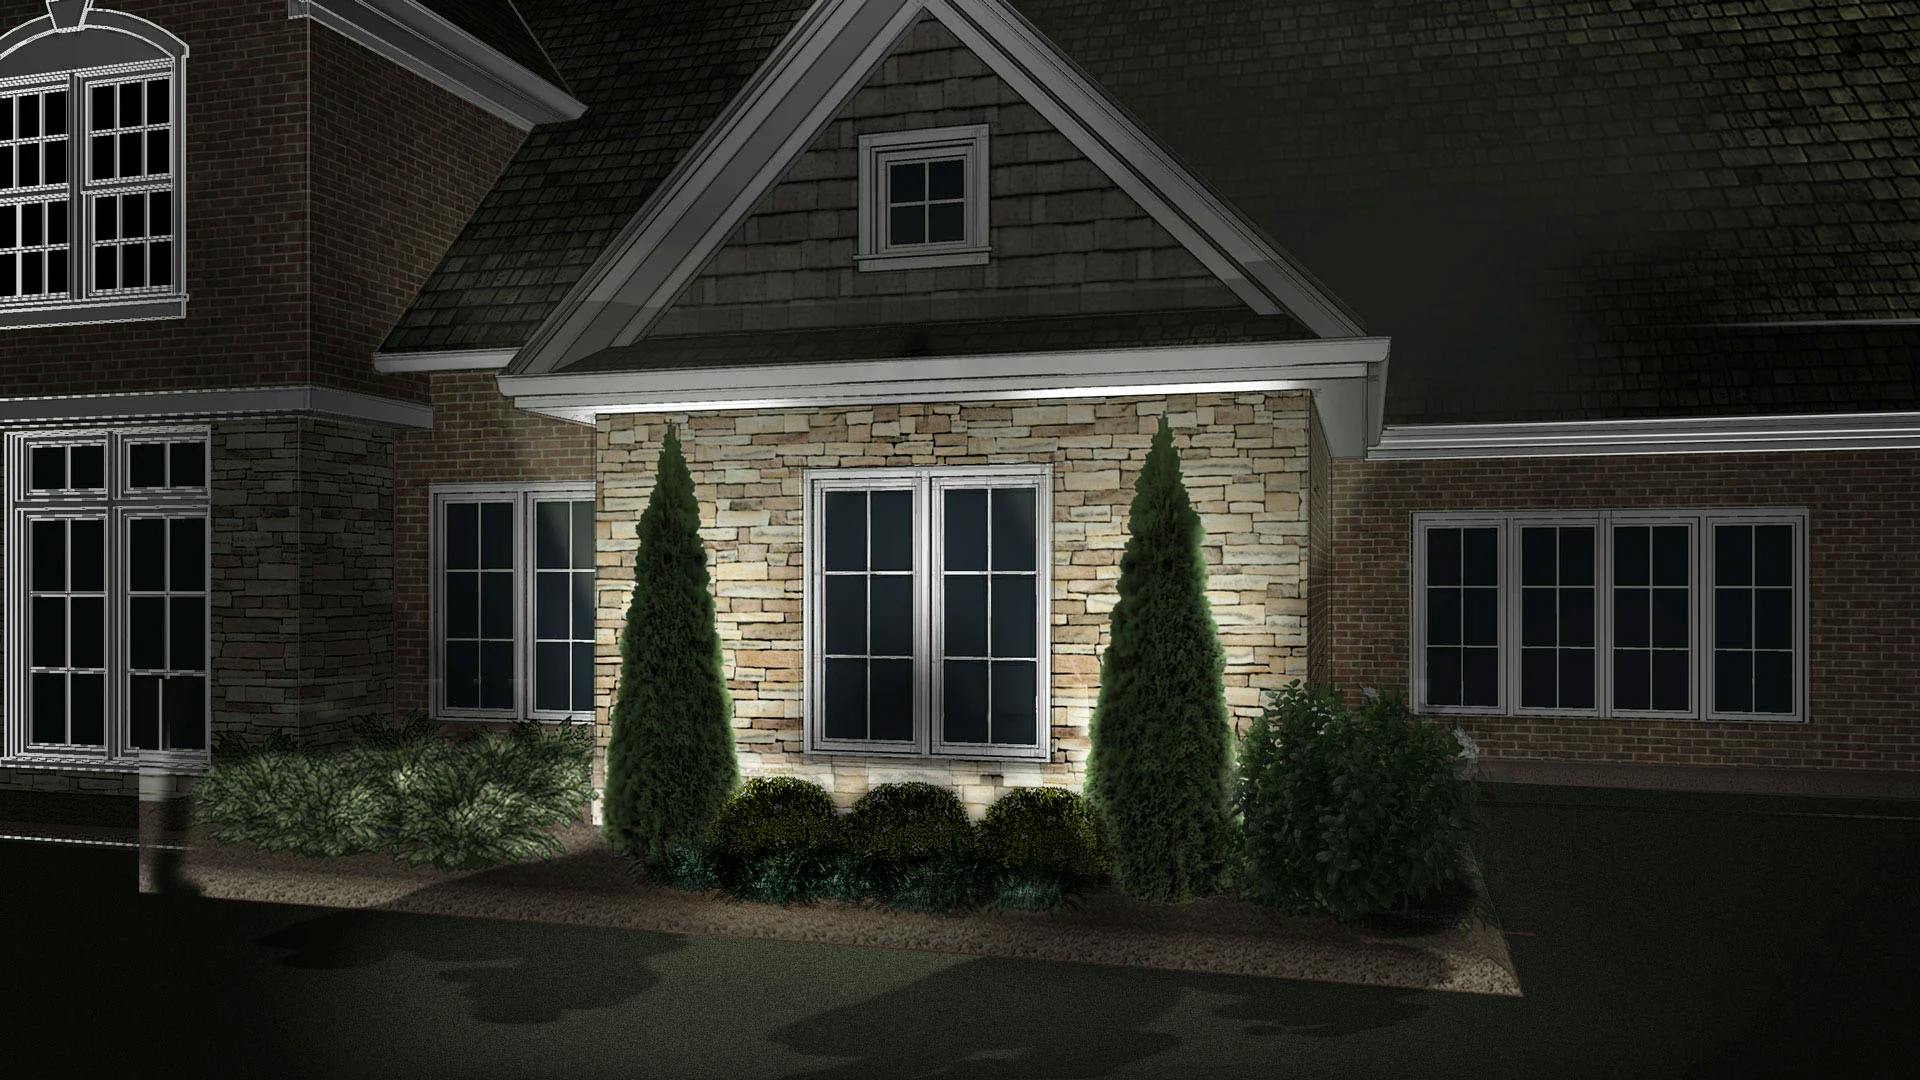 An exterior of a home at night with uplights behind tall shrubs.